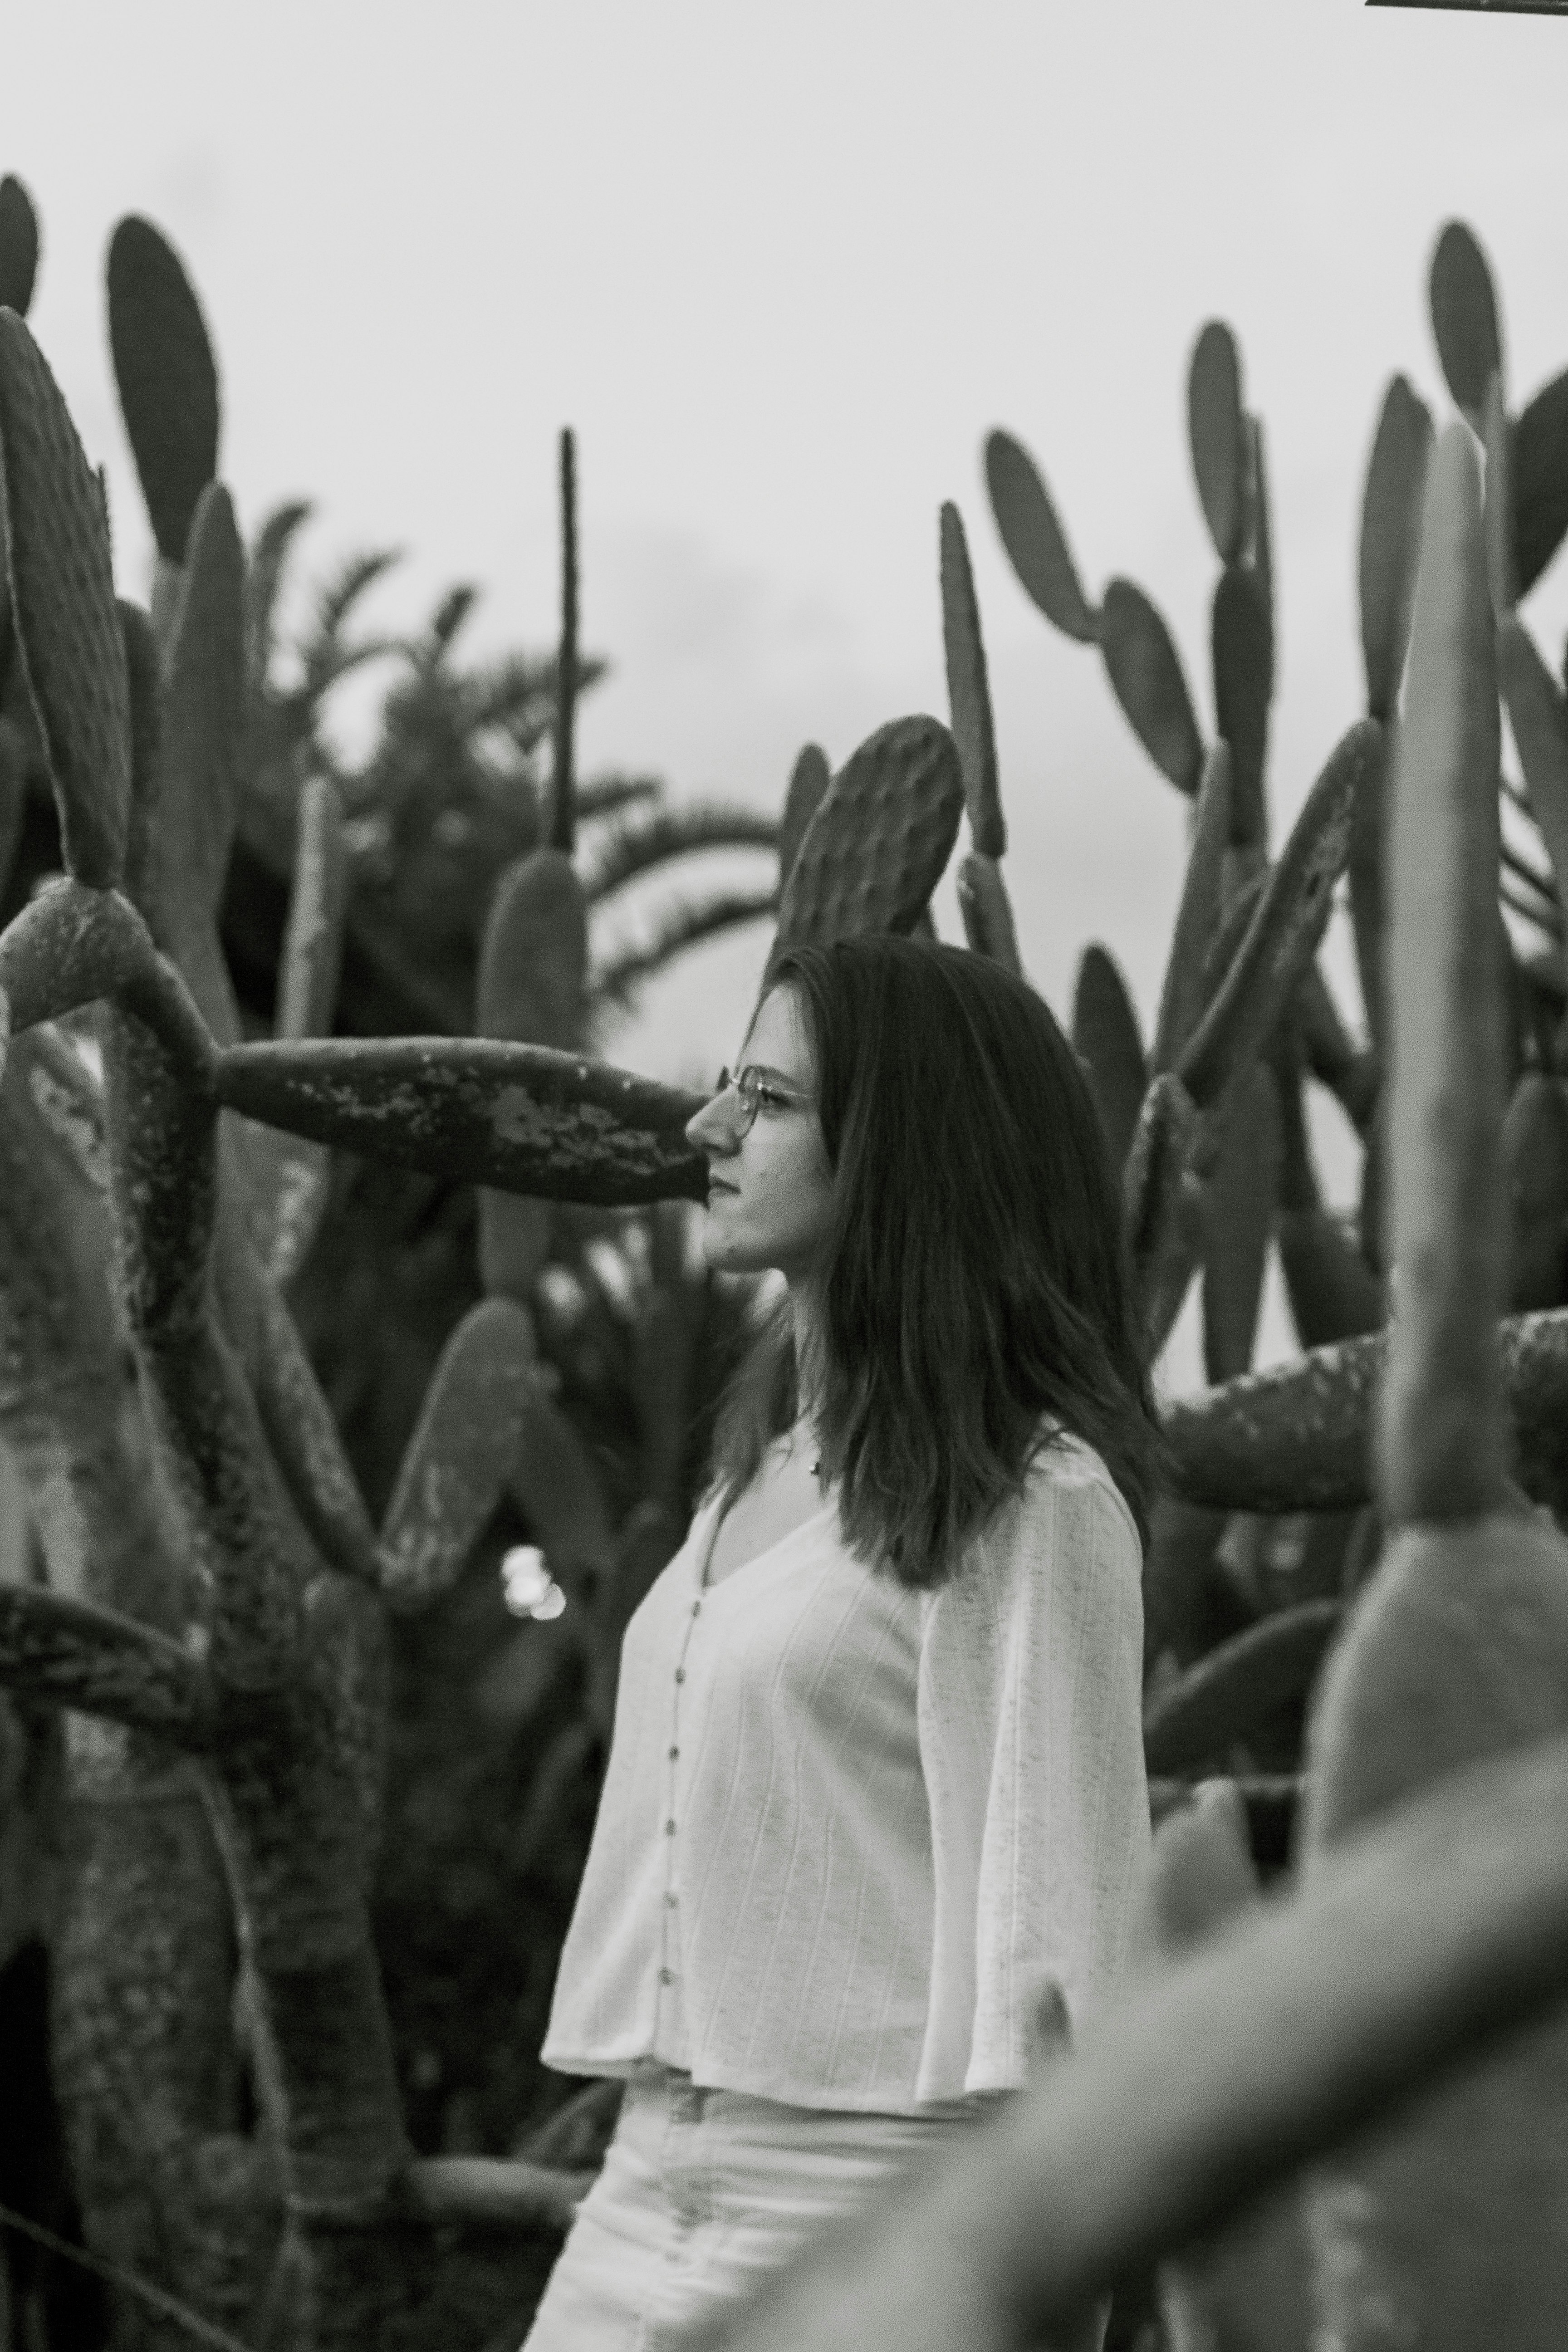 grayscale photo of woman standing near cactus plant